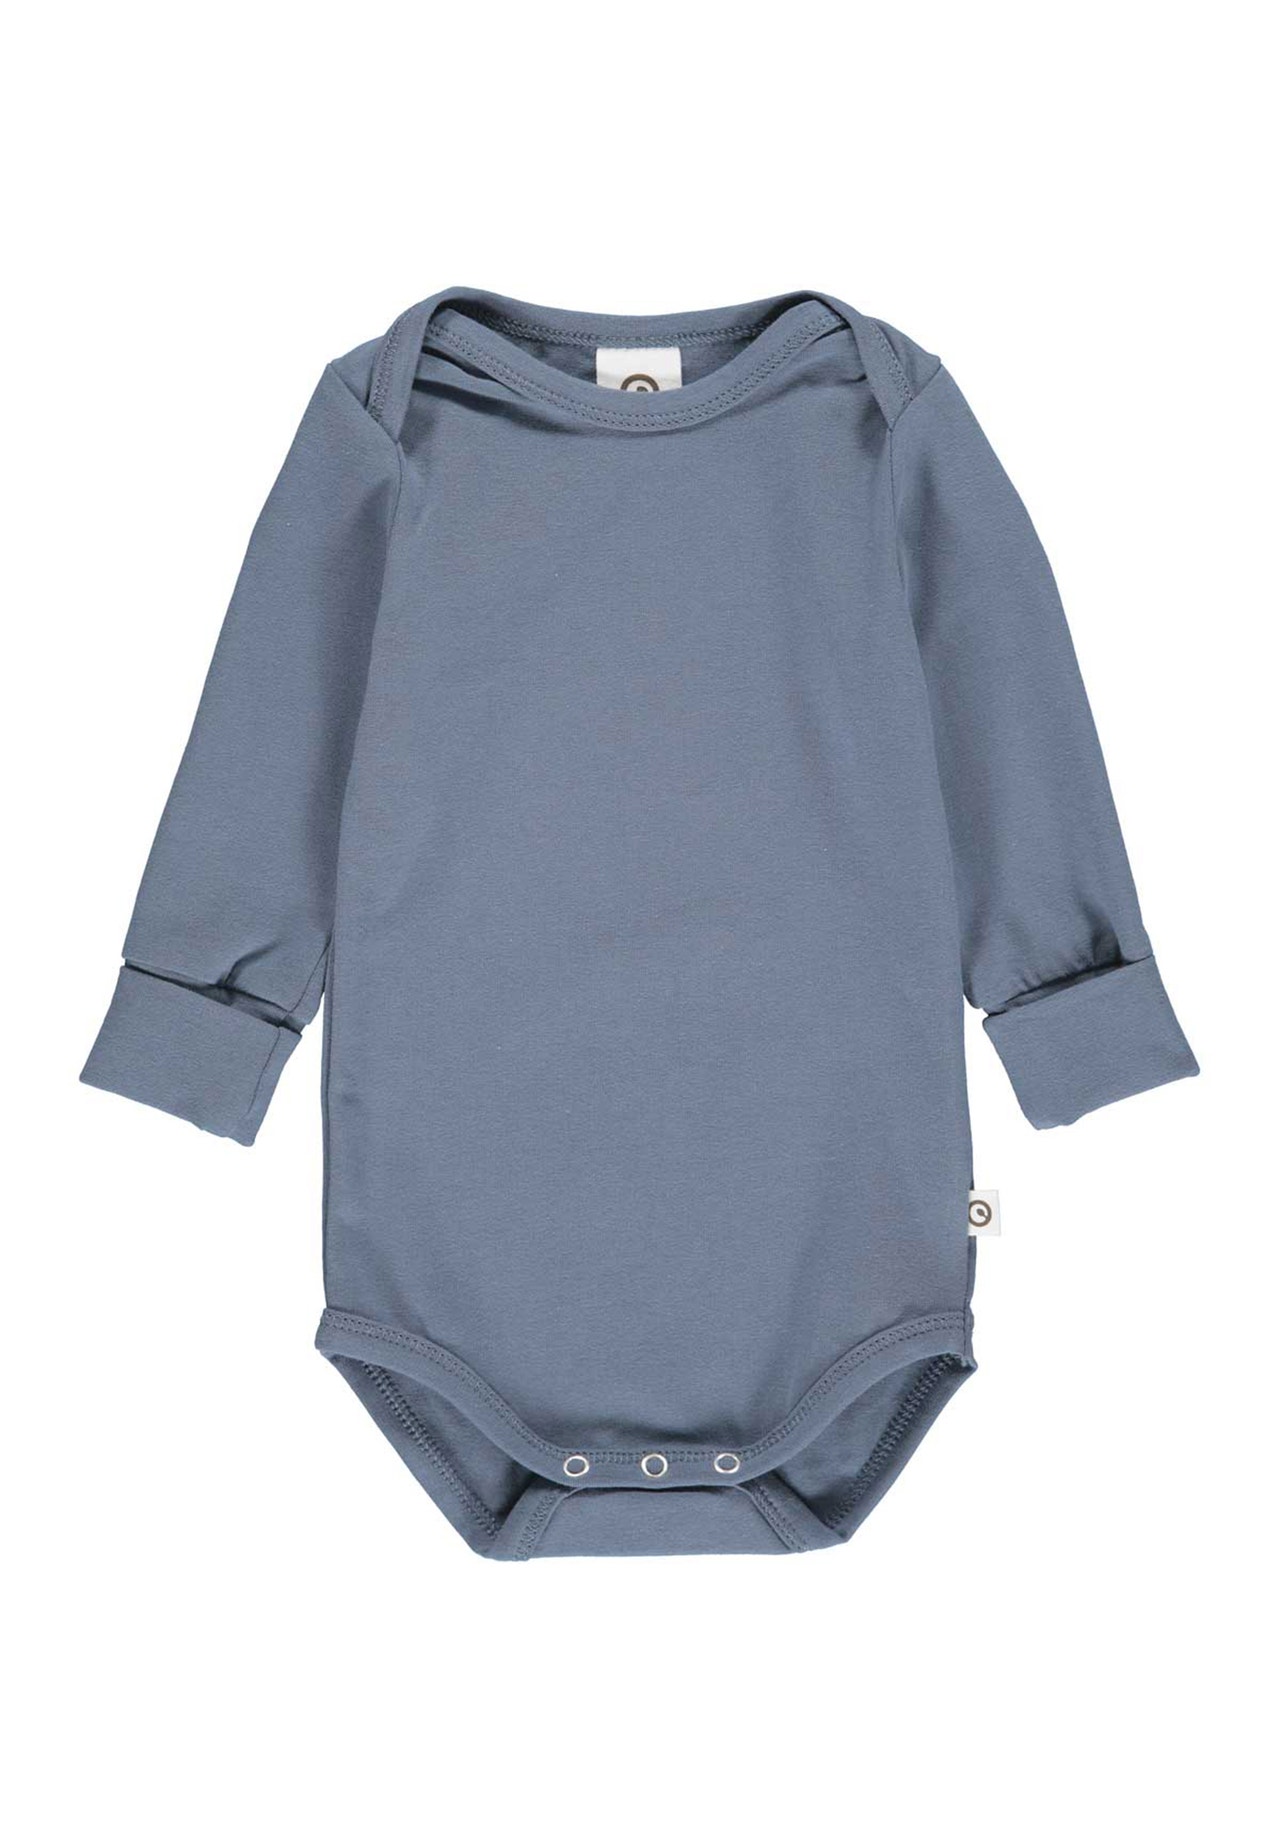 MAMA.LICIOUS Baby-romper -Dusty Blue - 1582014200